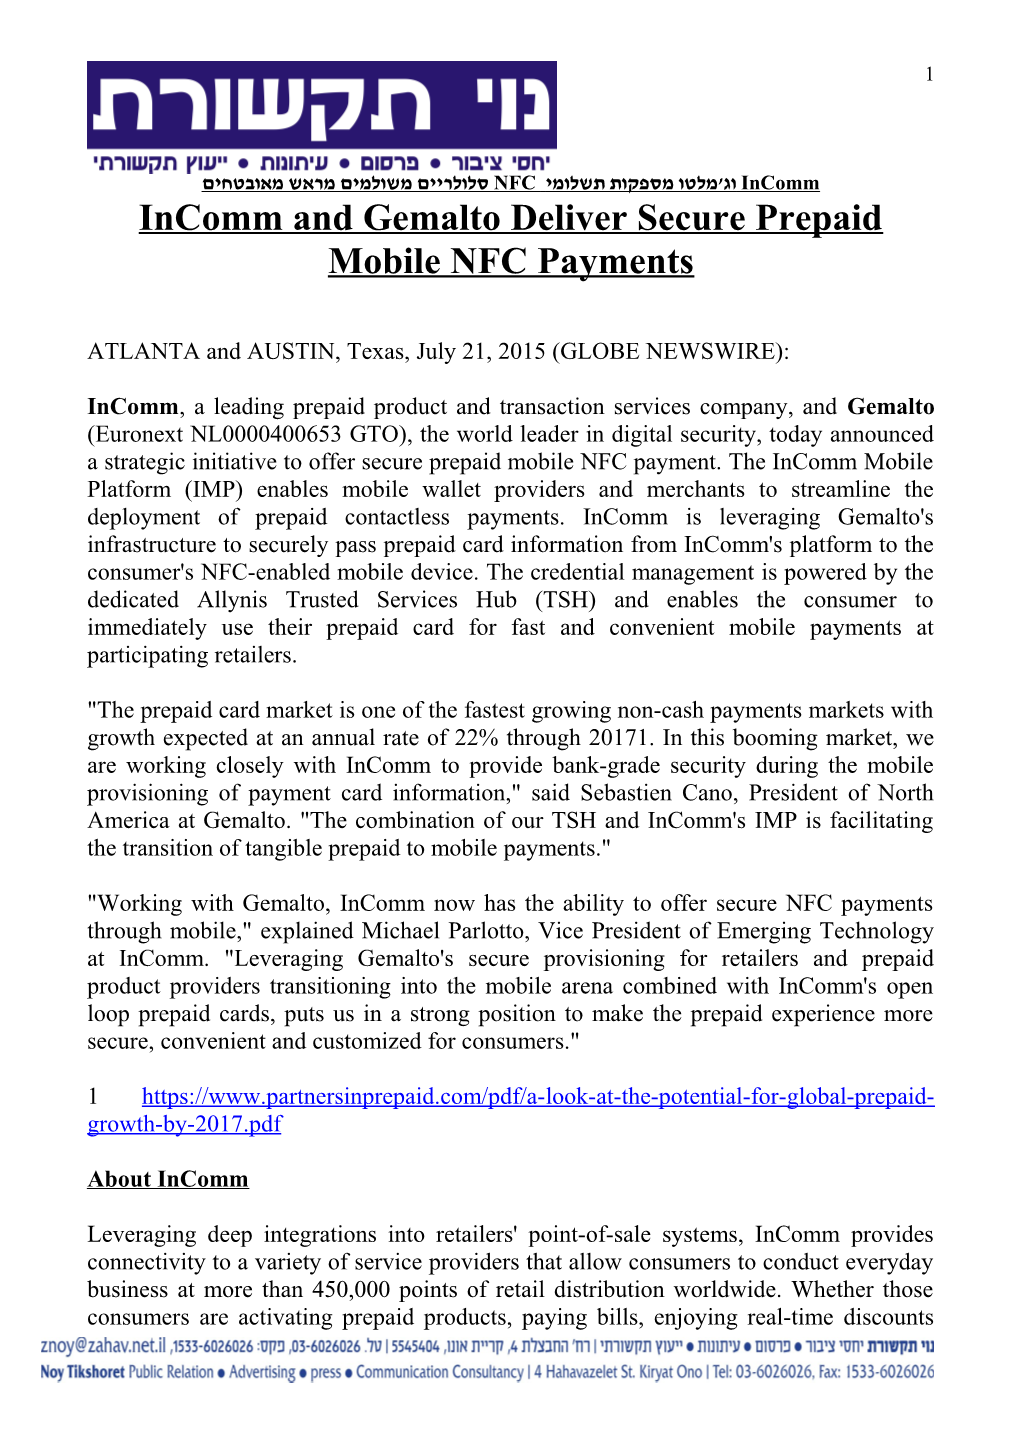 Incomm and Gemalto Deliver Secure Prepaid Mobile NFC Payments